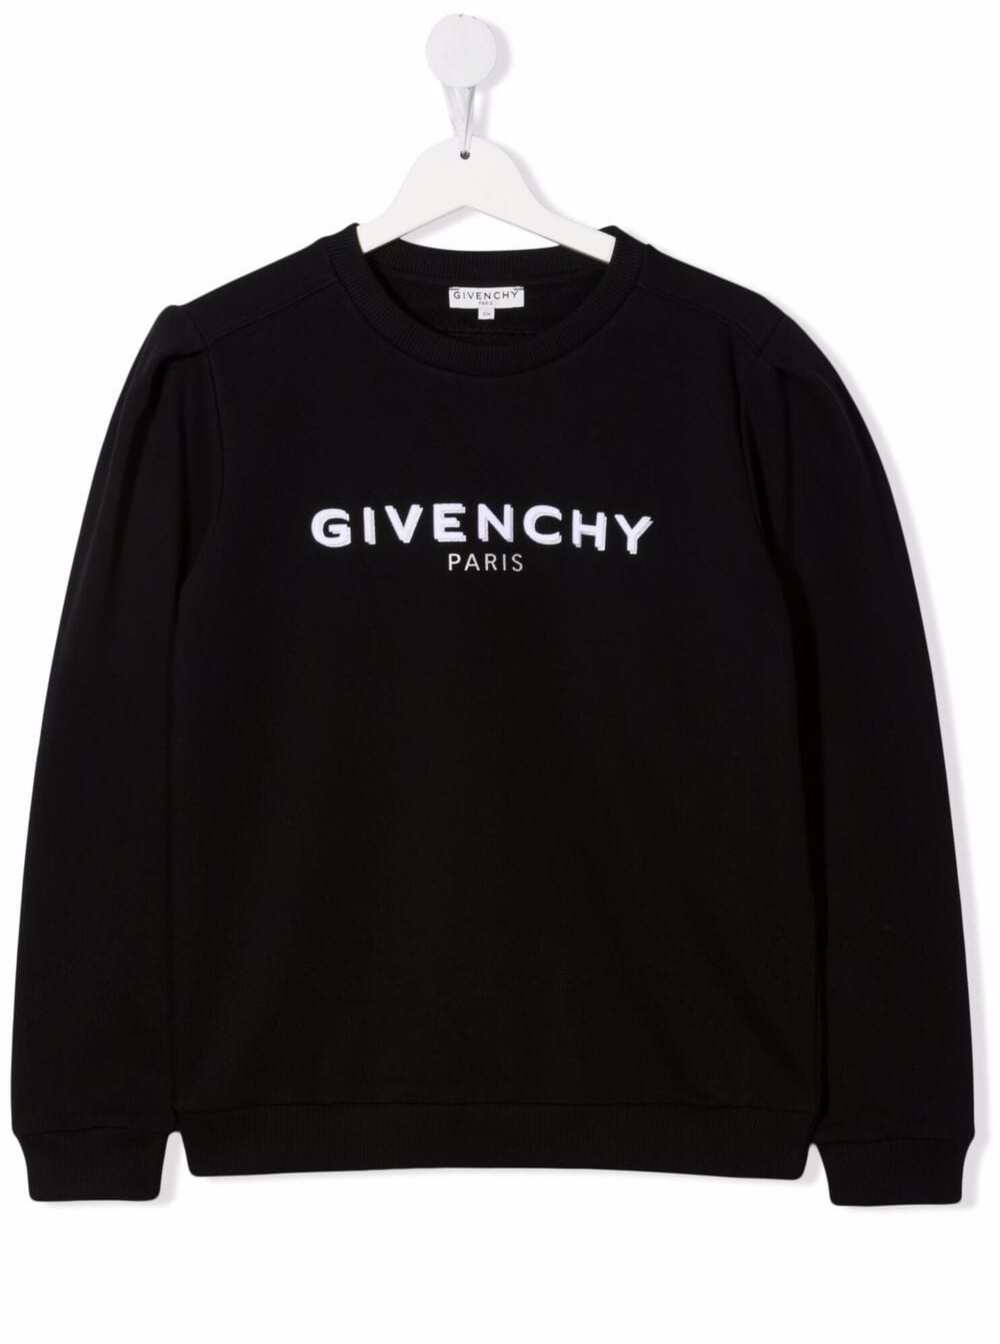 Givenchy Sweater Crew Neck